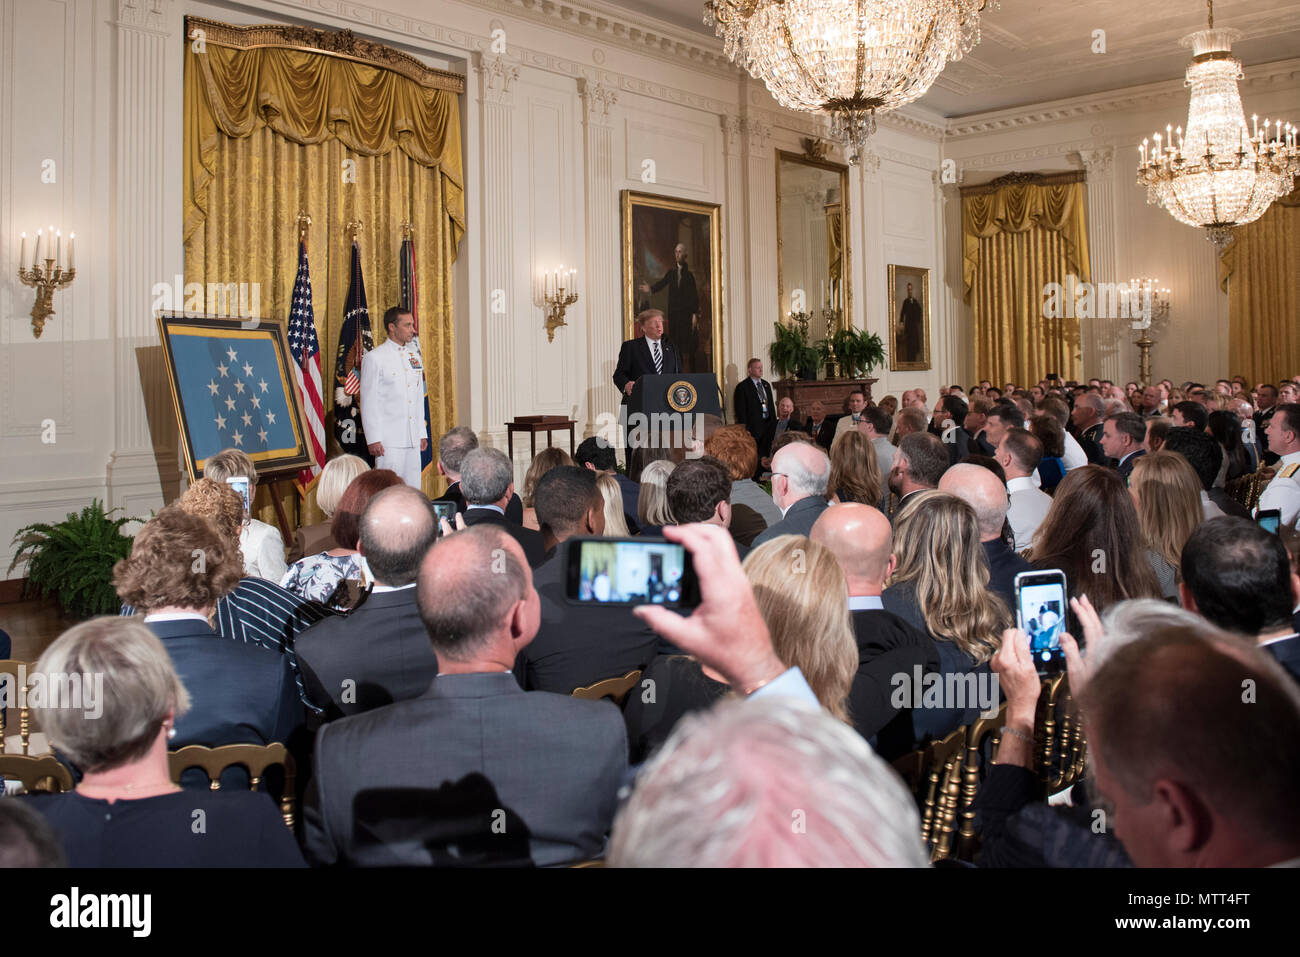 180524-N-BB269-005  WASHINGTON (May 24, 2018) President Donald J. Trump delivers remarks during the Medal of Honor ceremony in honor of retired Master Chief Special Warfare Operator (SEAL) Britt Slabinski at the White House in Washington, D.C. Slabinski received the Medal of Honor for his actions during Operation Anaconda in Afghanistan in March 2002. (U.S. Navy photo by Mass Communication Specialist 1st Class Raymond D. Diaz III/Released) Stock Photo